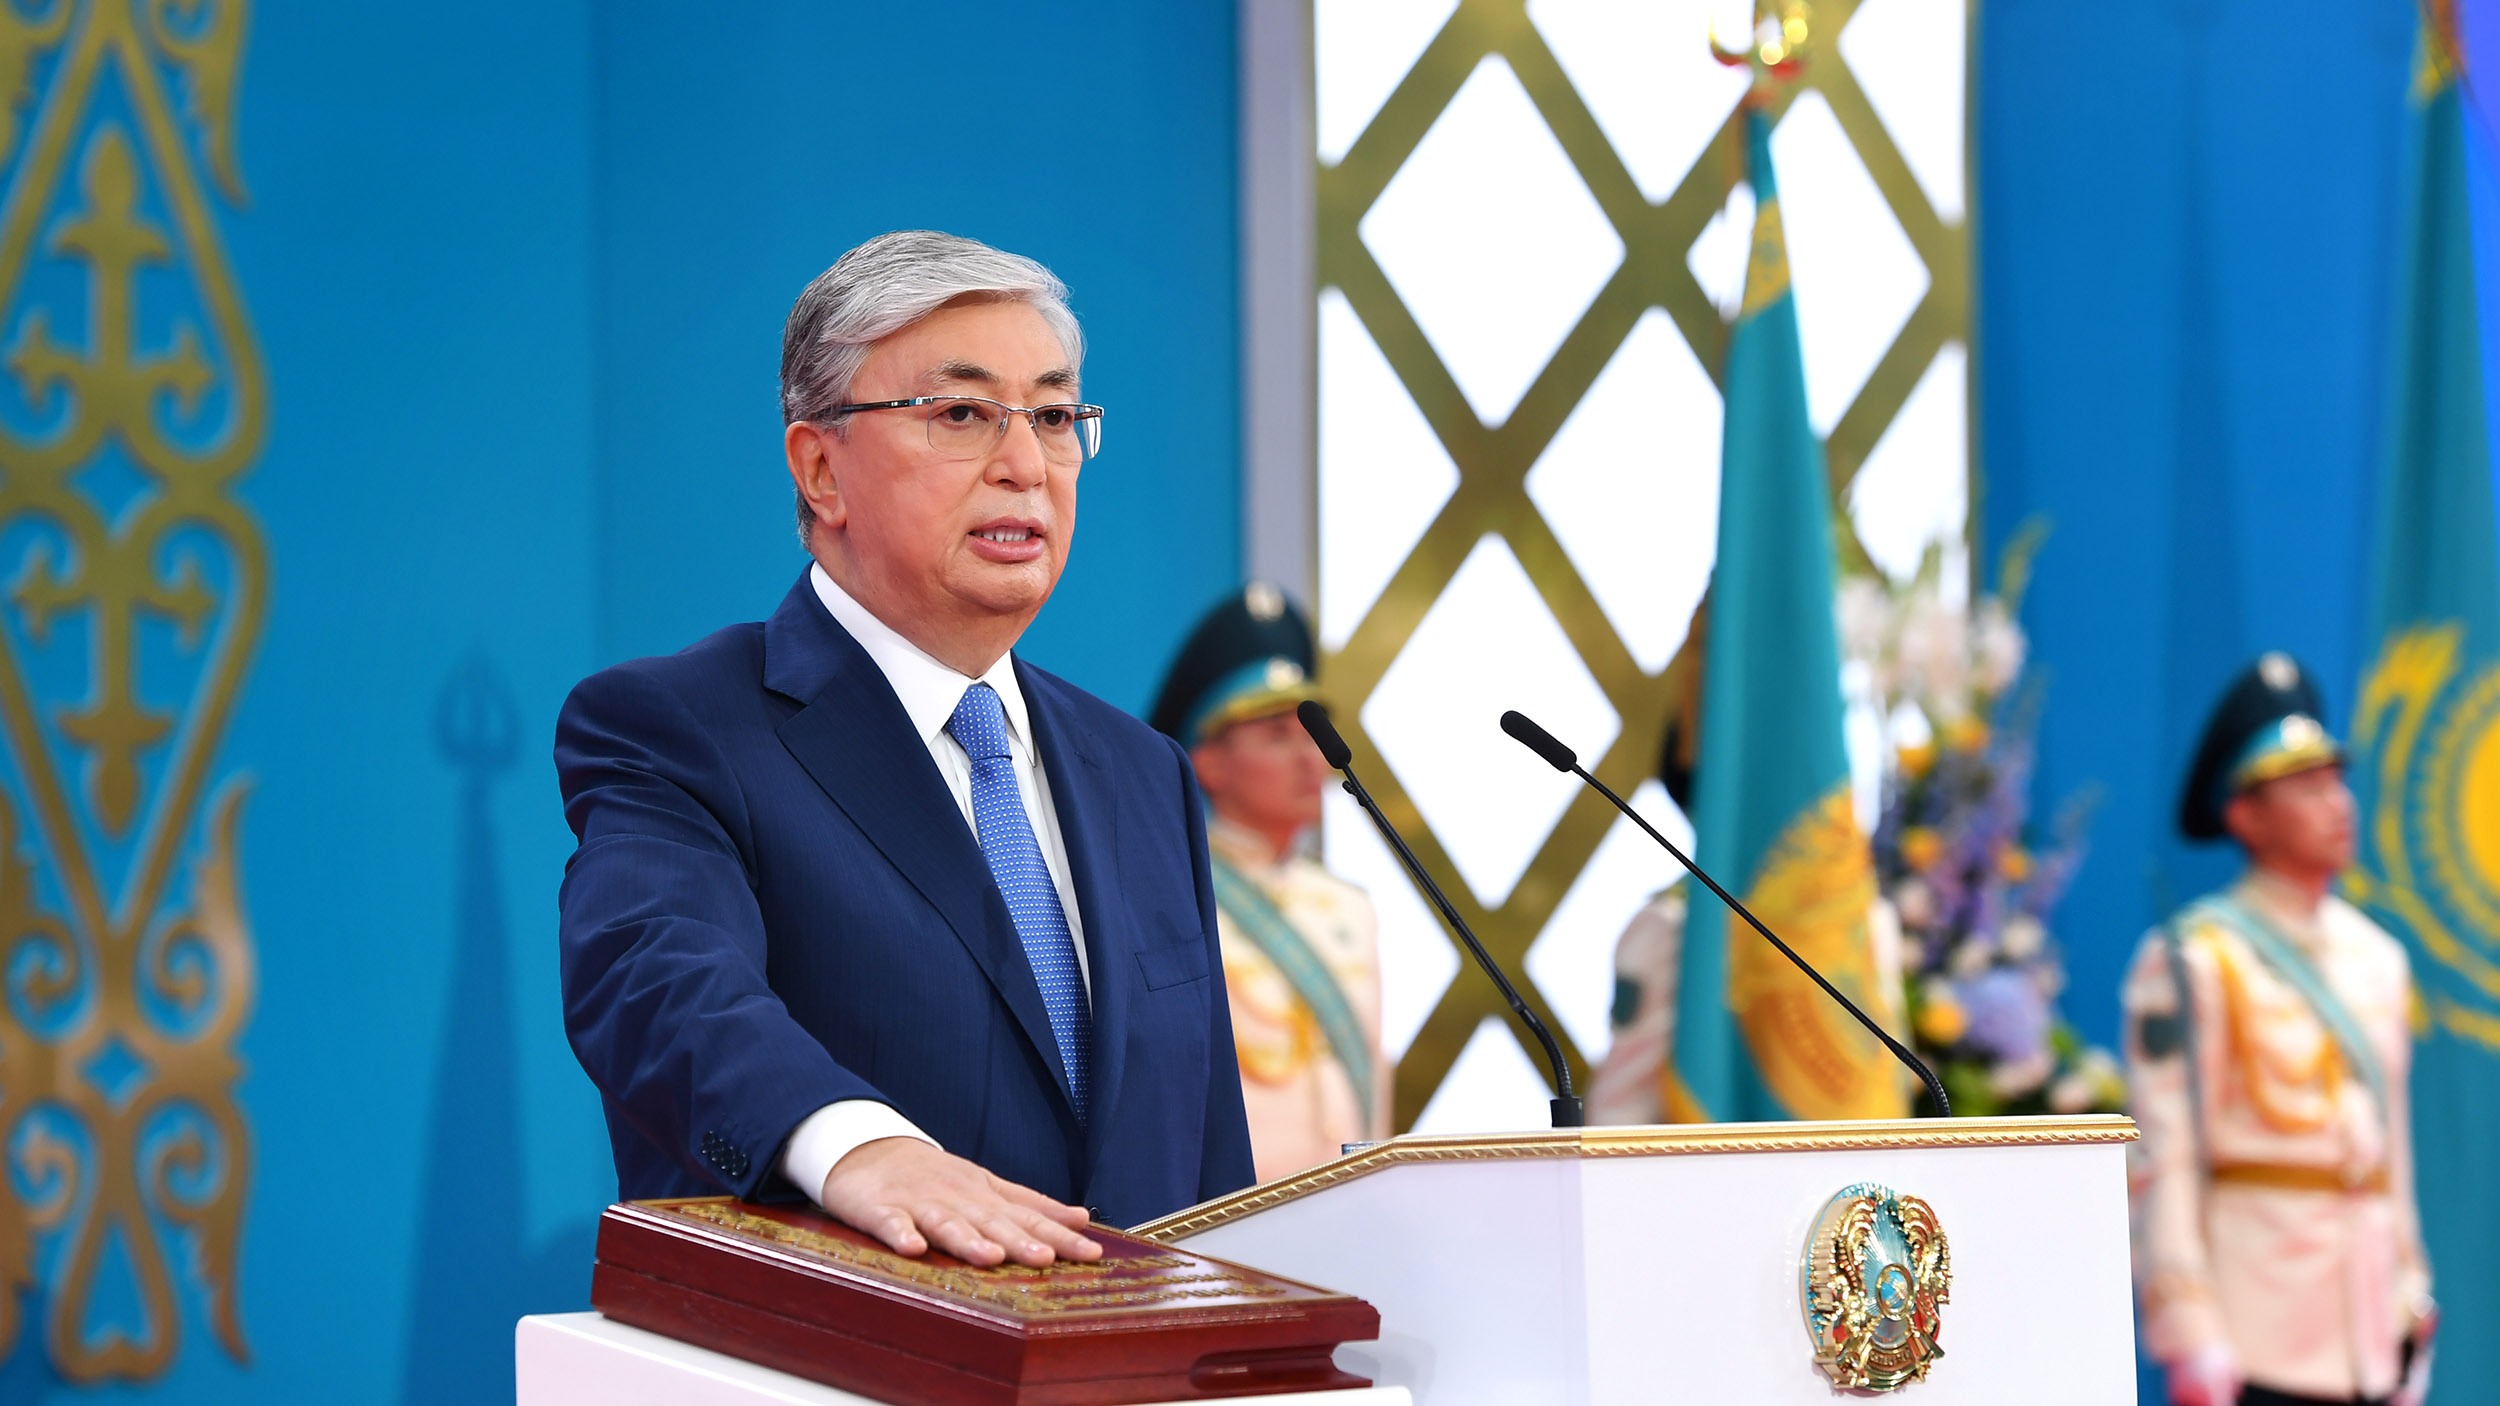 The official inauguration ceremony held for K.Tokayev as President of Kazakhstan